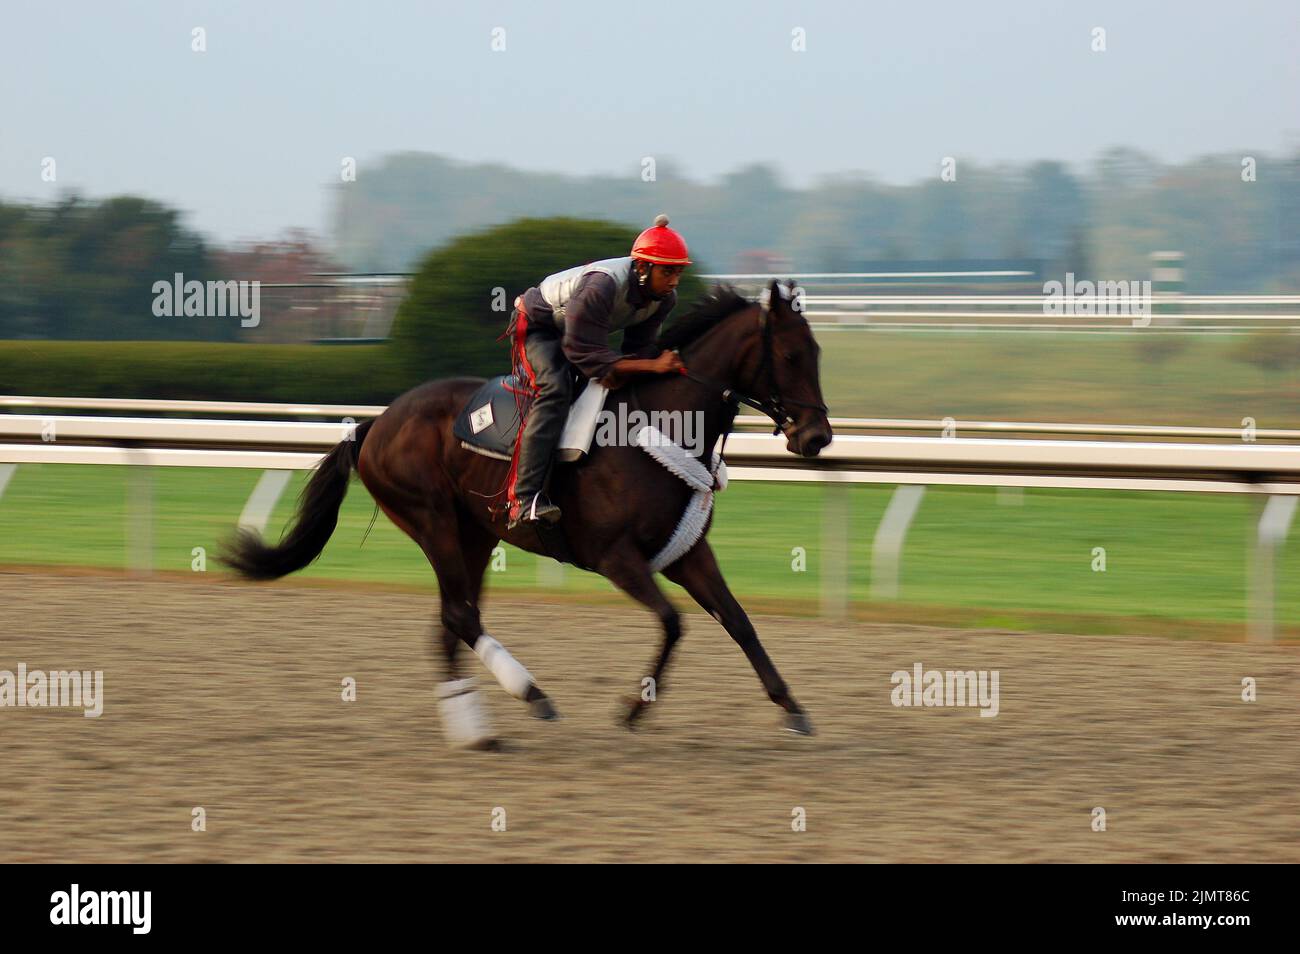 A jockey takes a thoroughbred racehorse on the track in Lexington, Kentucky for the early morning workout and exercises before the race Stock Photo